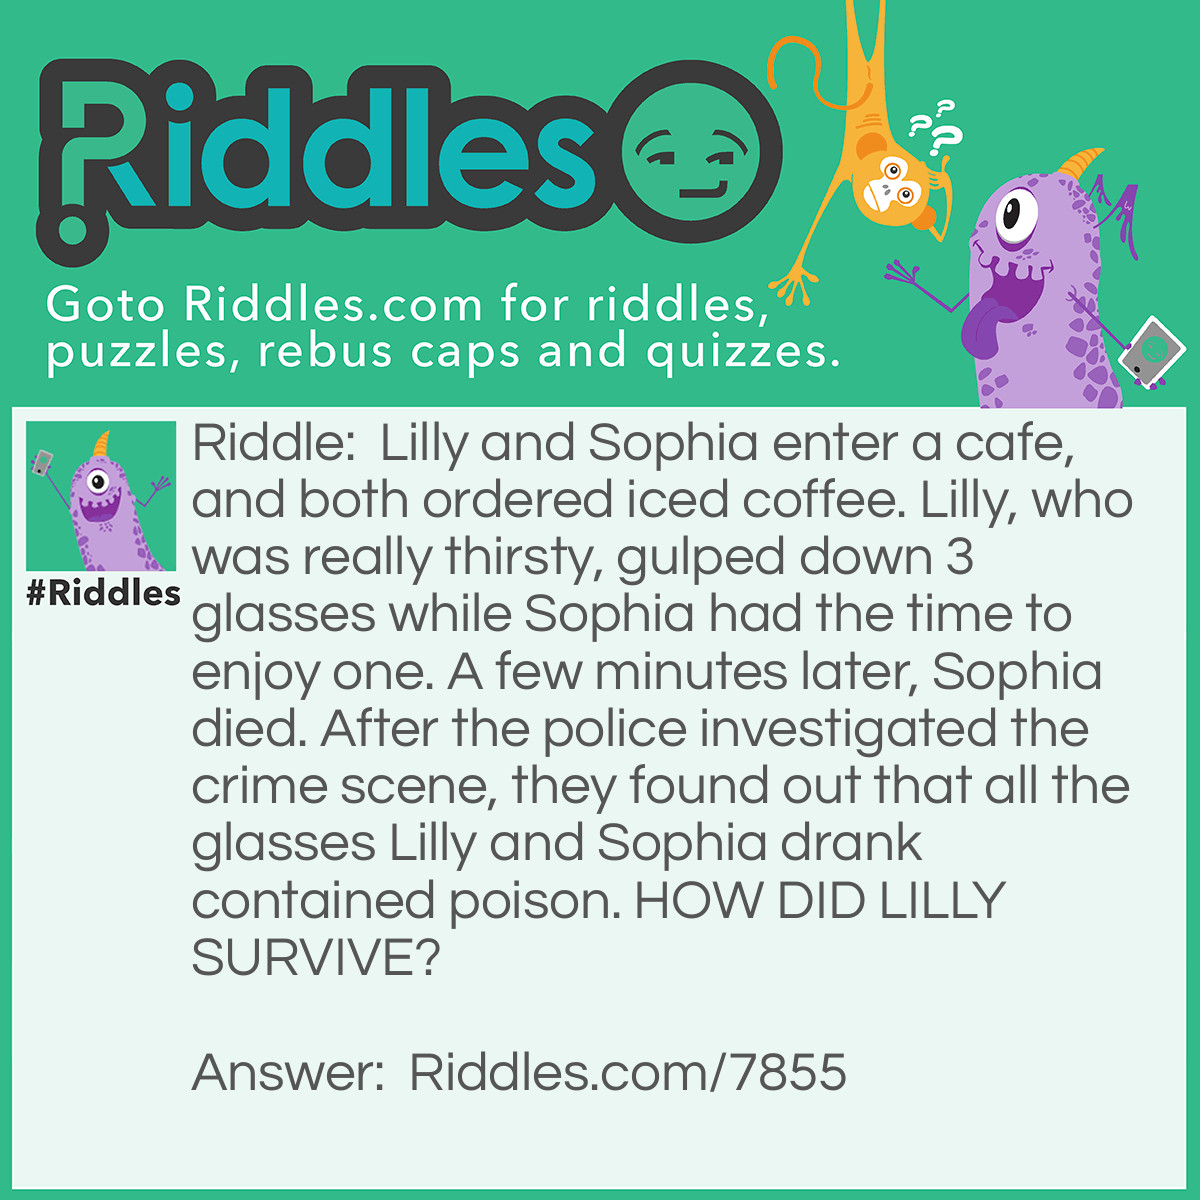 Riddle: Lilly and Sophia enter a cafe, and both ordered iced coffee. Lilly, who was really thirsty, gulped down 3 glasses while Sophia had the time to enjoy one. A few minutes later, Sophia died. After the police investigated the crime scene, they found out that all the glasses Lilly and Sophia drank contained poison. HOW DID LILLY SURVIVE? Answer: The poison was in the ice. Lilly drank quickly, so the ice cubes didn't have time to melt. But Sophia, on the other hand, drank slowly and the ice cubes melted and the poison entered her coffee.